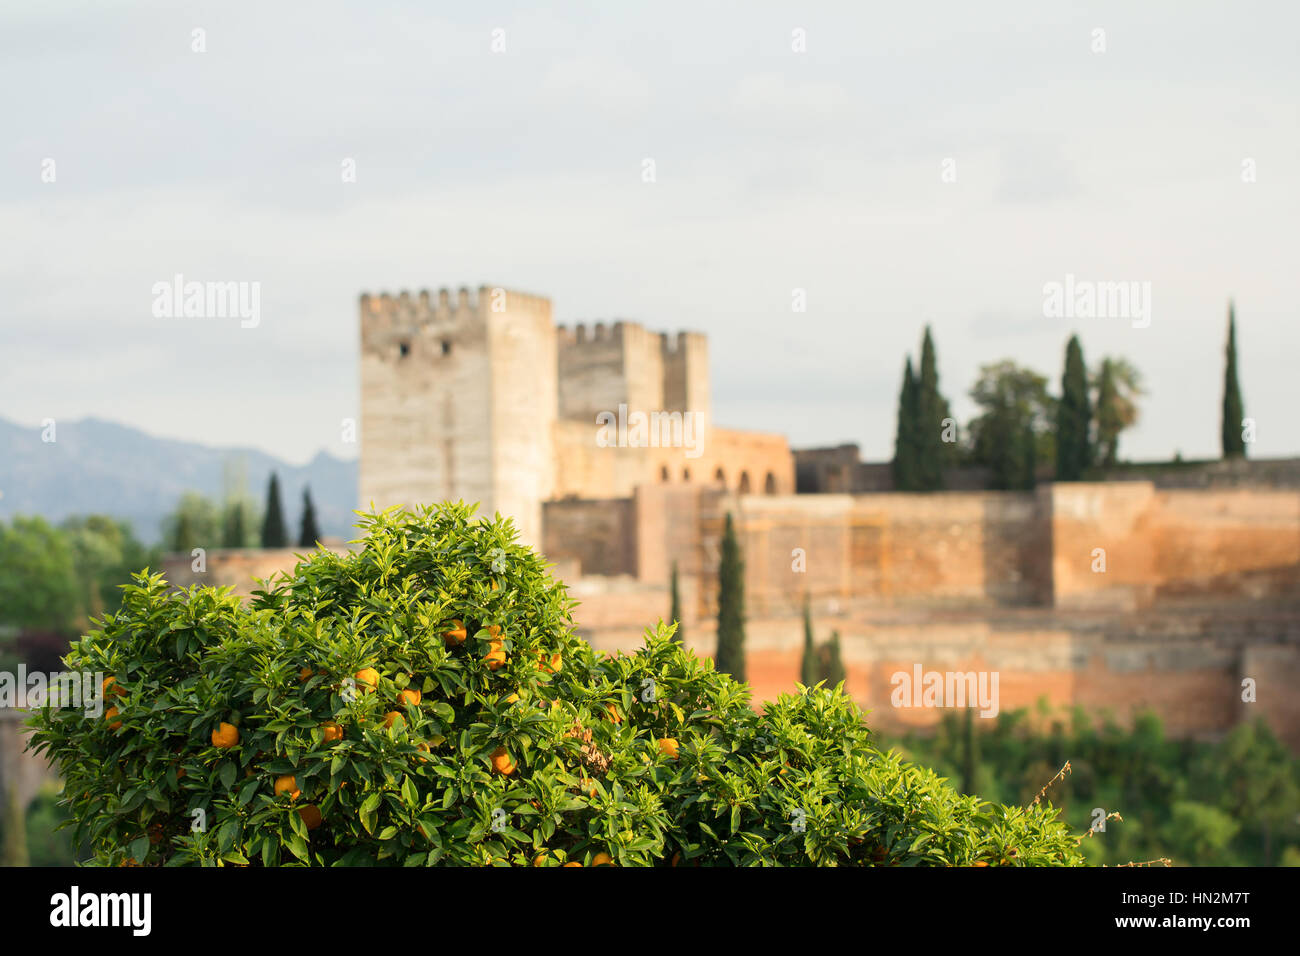 Alhambra Palace in Spagna Foto Stock